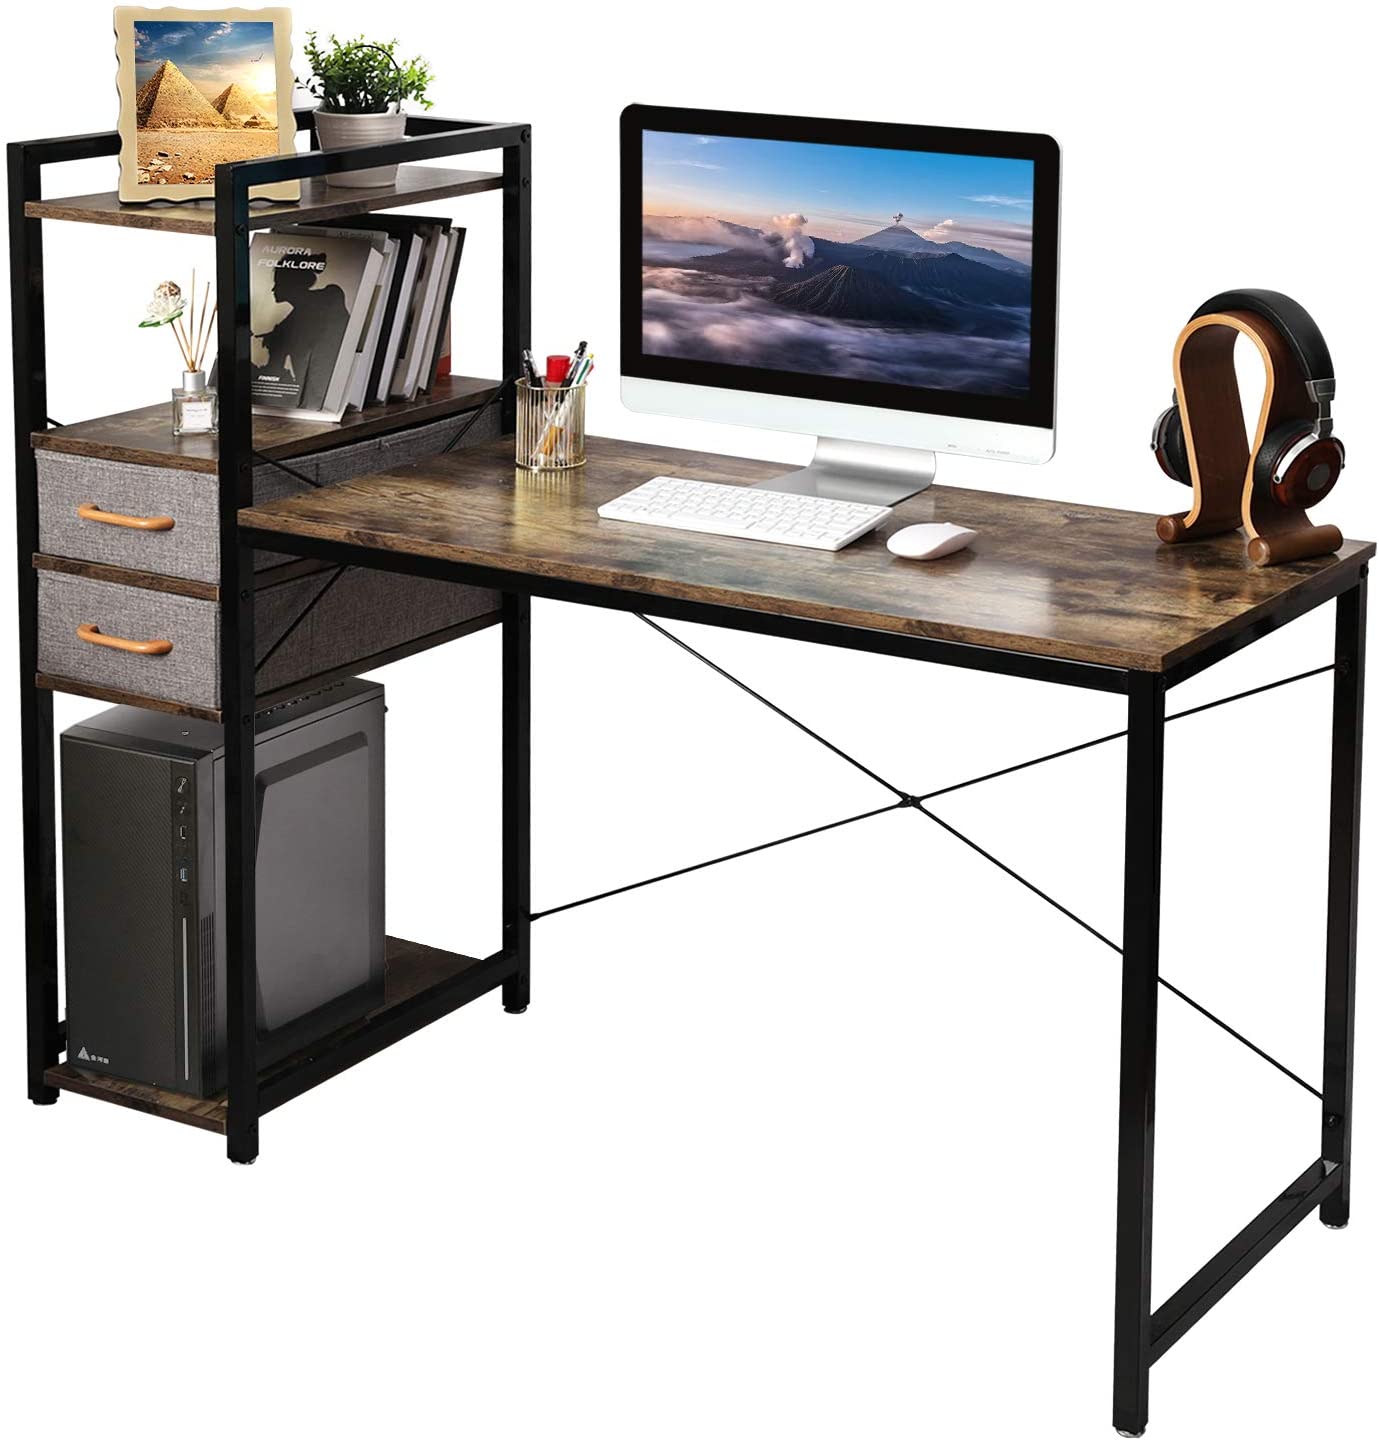 X-cosrack Small Computer Desk with Drawers